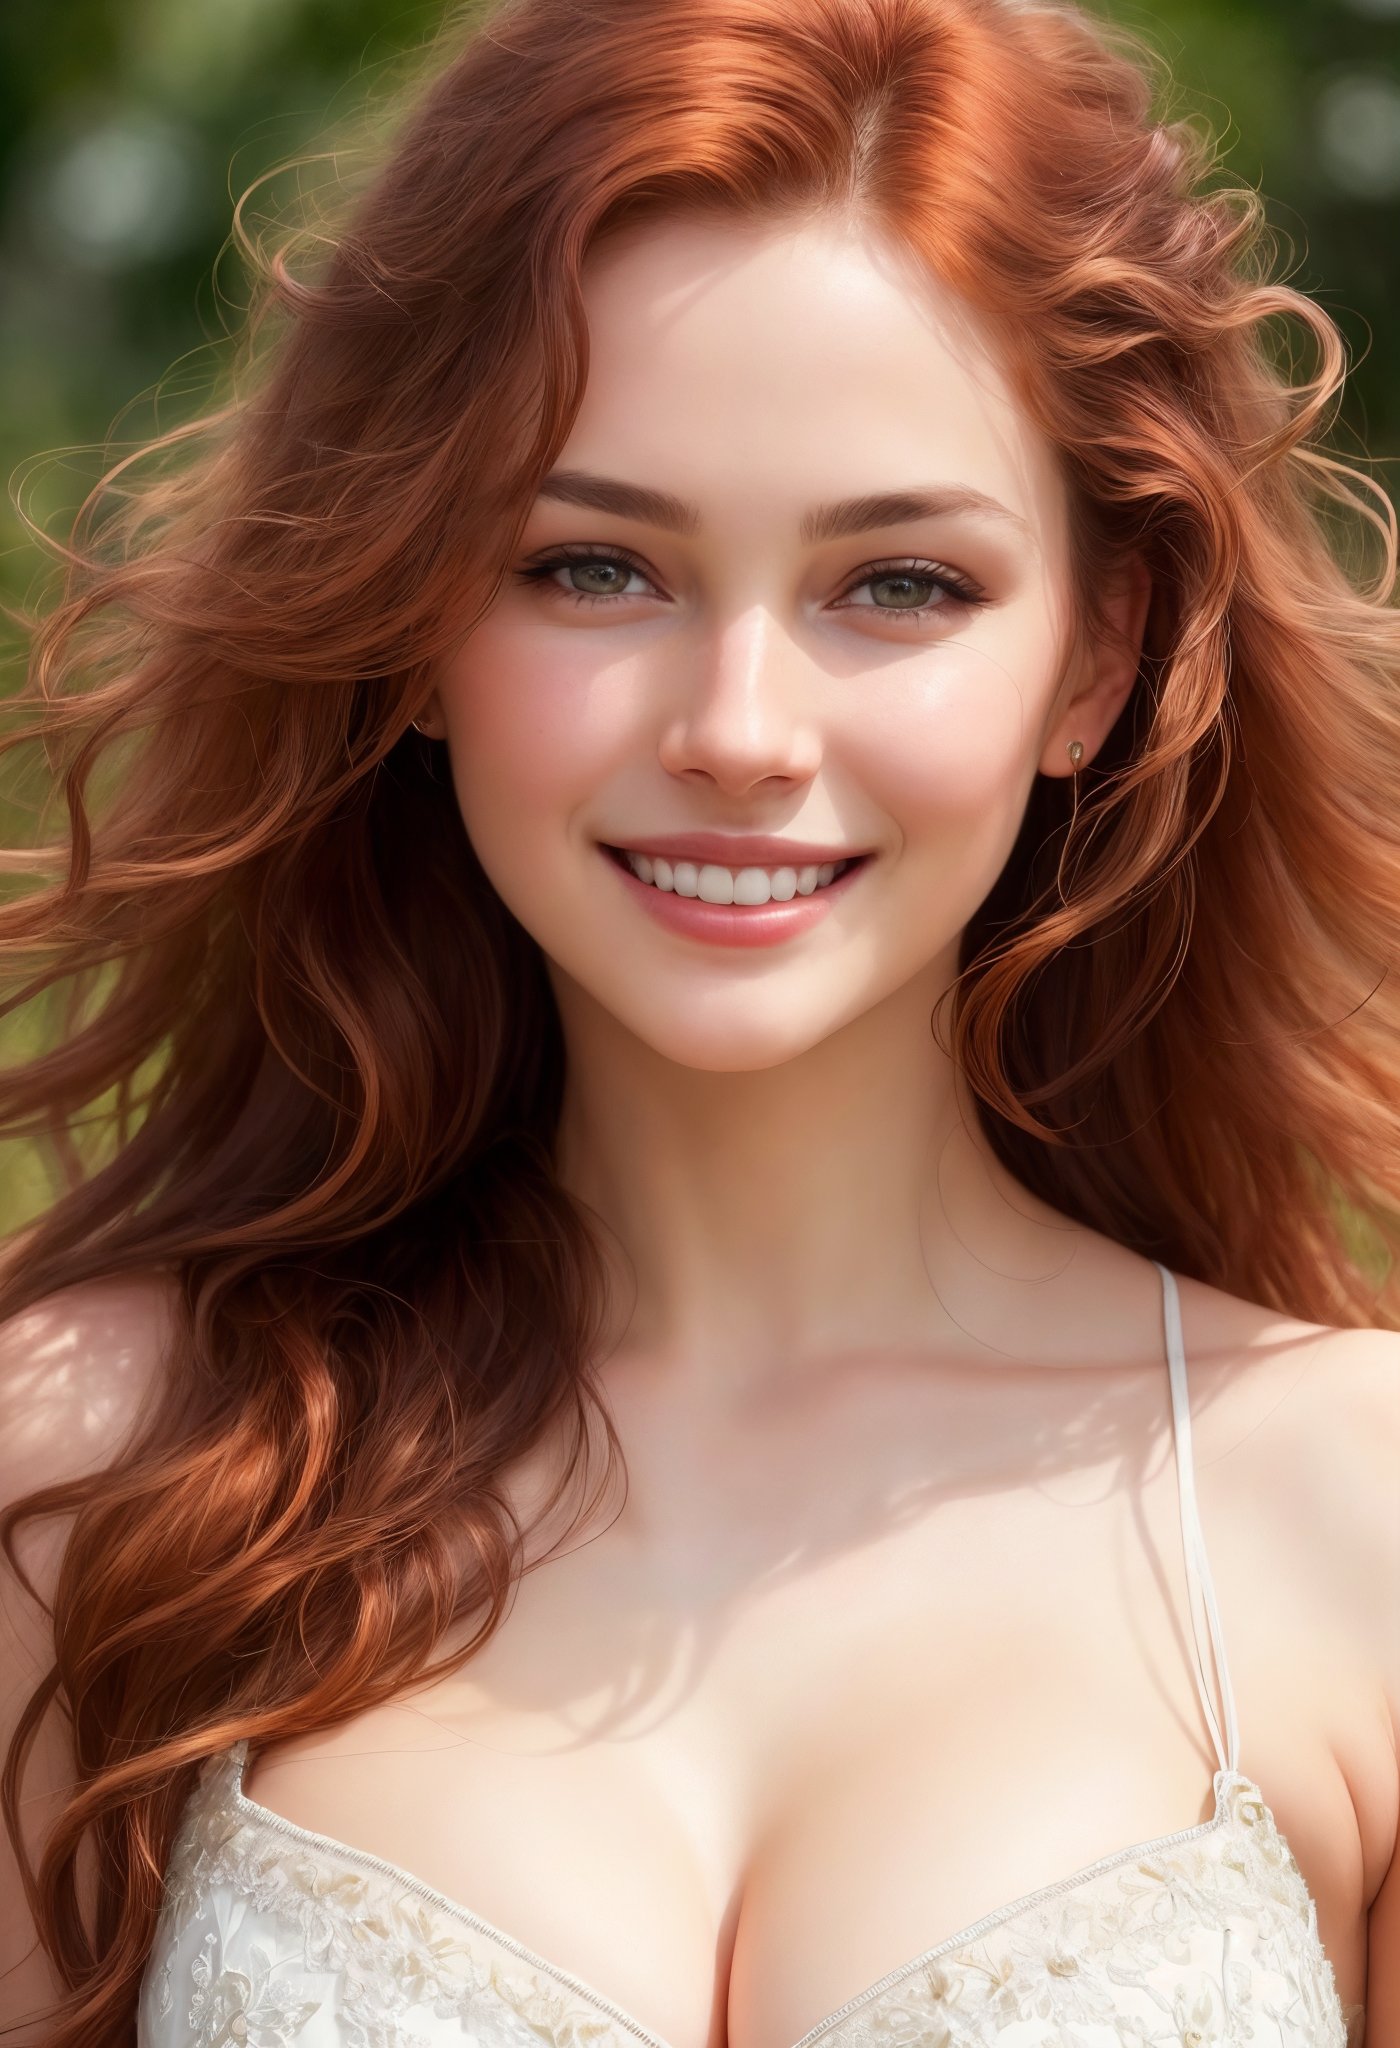 stunningly beautiful   (((extremely innocent face ))), wild hair, ((best quality)), ((masterpiece)), (detailed),   highly detailed HDR photo, 8k quality, best quality, high resolution ultra photorealistic, high definition, highly detailed photo, photon mapping, dynamic angle, professional lighting, highly detailed face and body,expressive eyes, perfectly detailed face, smile, gorgeous face,  real skin details, soft skin,   looking at viewer,                 


raw, photorealistic, real, perfect skin, real skin, realistic photo of a mid body shot,  ,  extremely innocent face, very  beautiful,


cheerful, laughing, clever naughty smile, , she is wearing a  pretty  dress,

she smile like gentle love goddess, very long tresses, red head  , brown hair, expressive face,


 